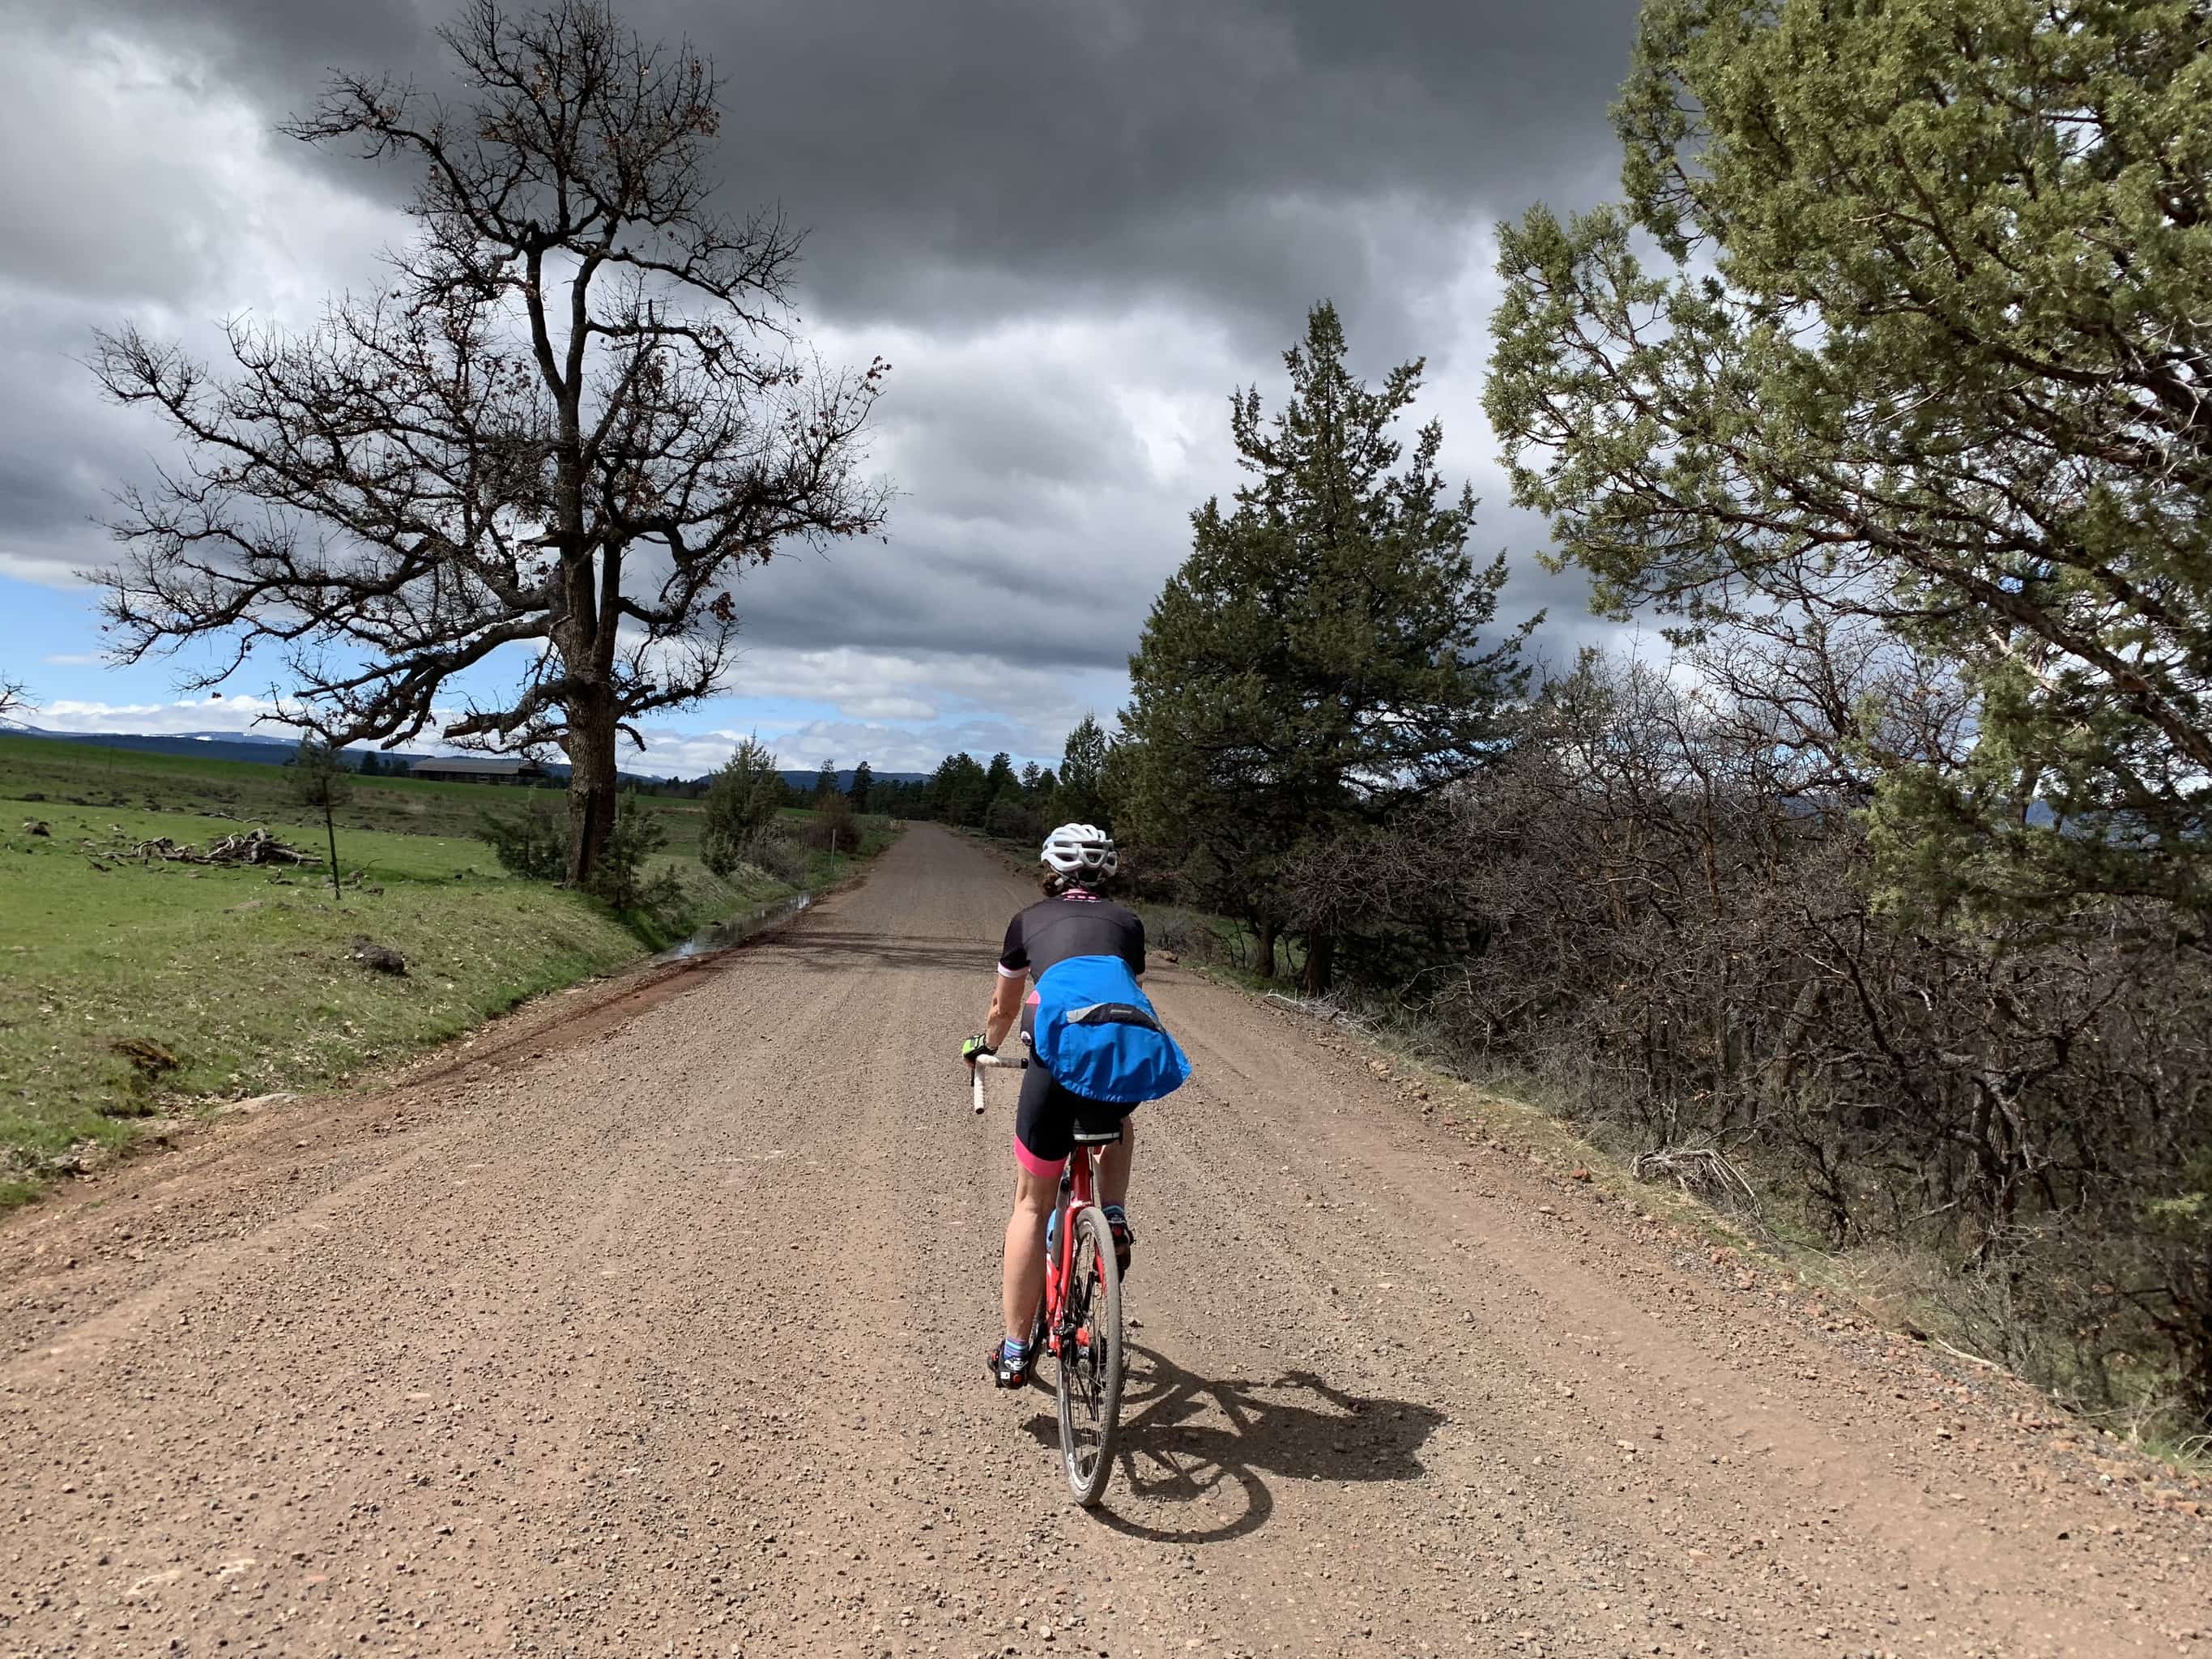 Cyclist on paved road with farmlands in background near Wamic, Oregon.